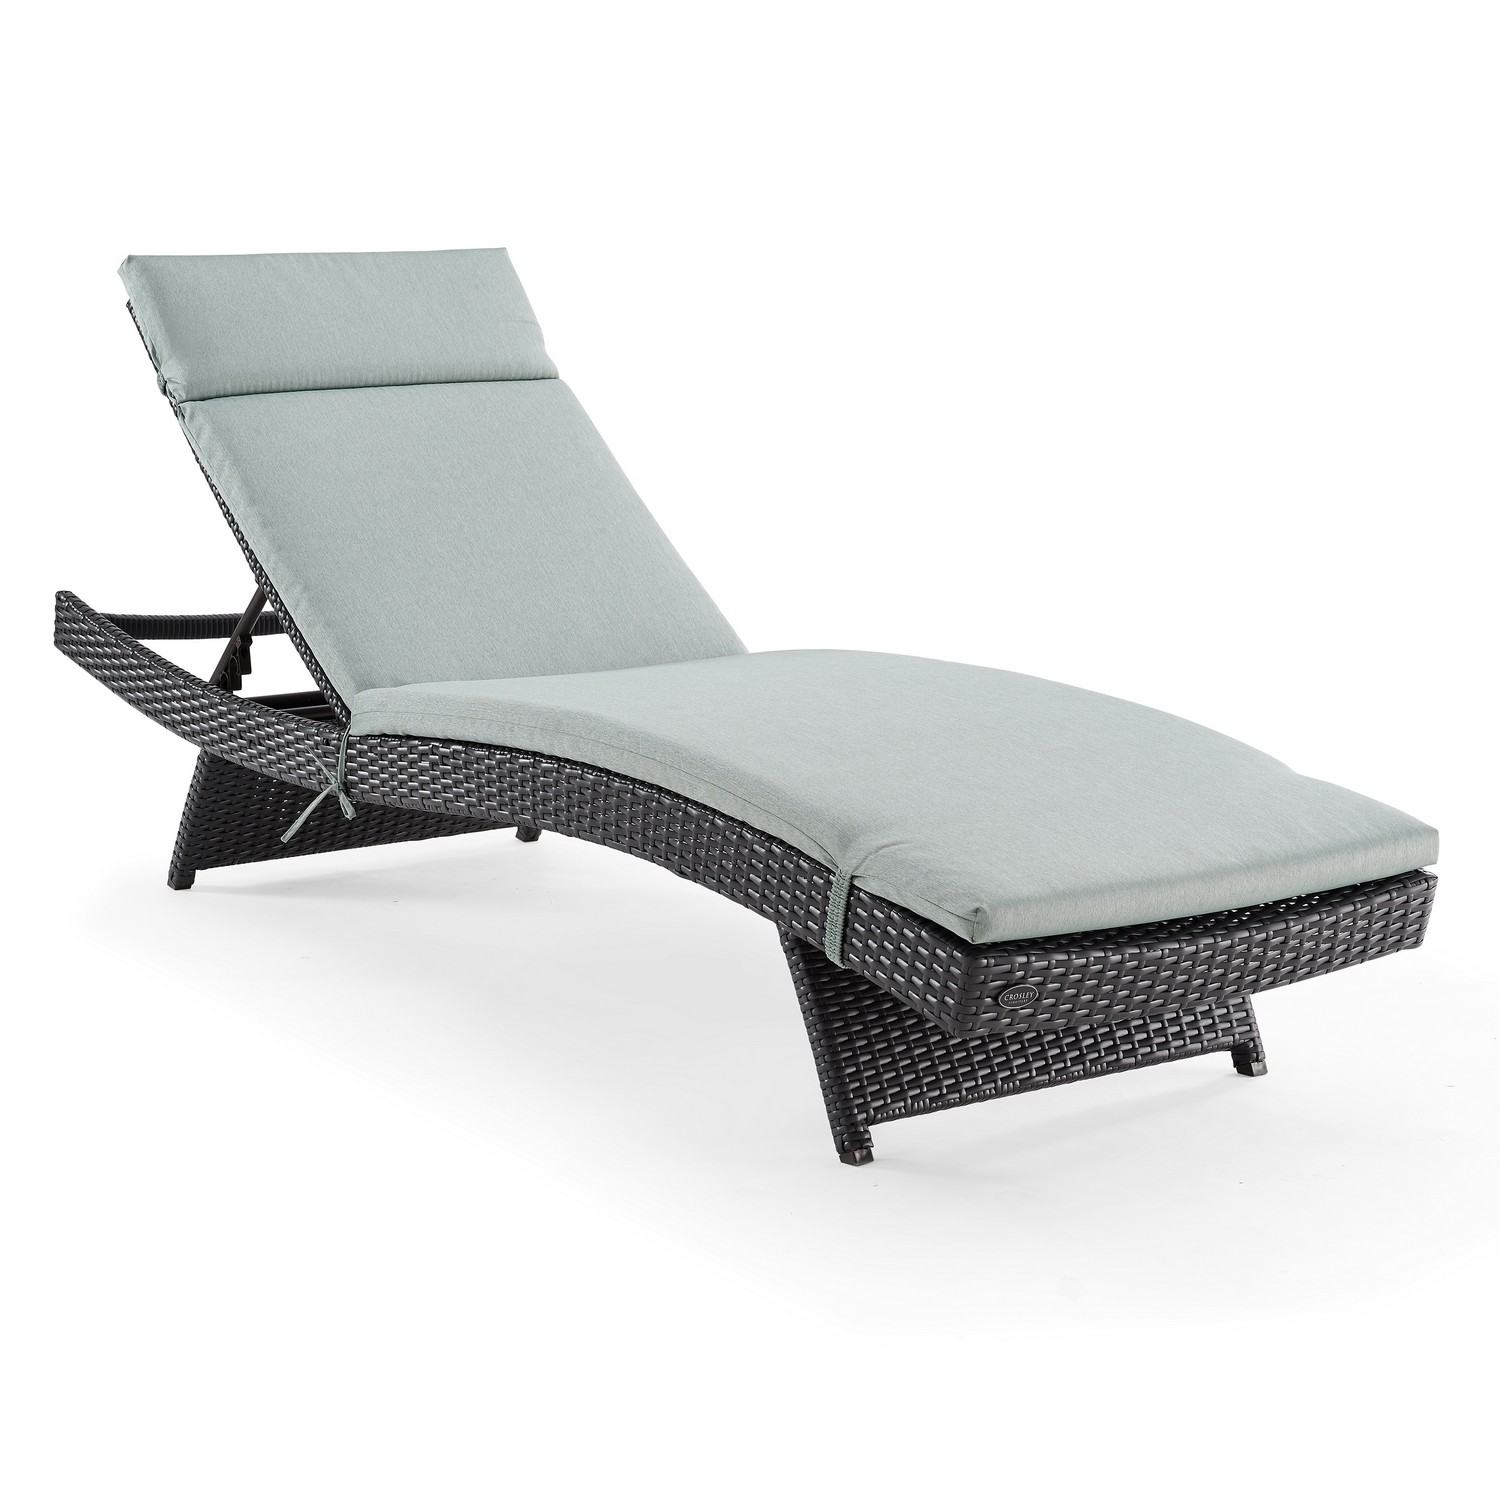 Crosley Biscayne Outdoor Wicker Chaise Lounge - Mist/Brown